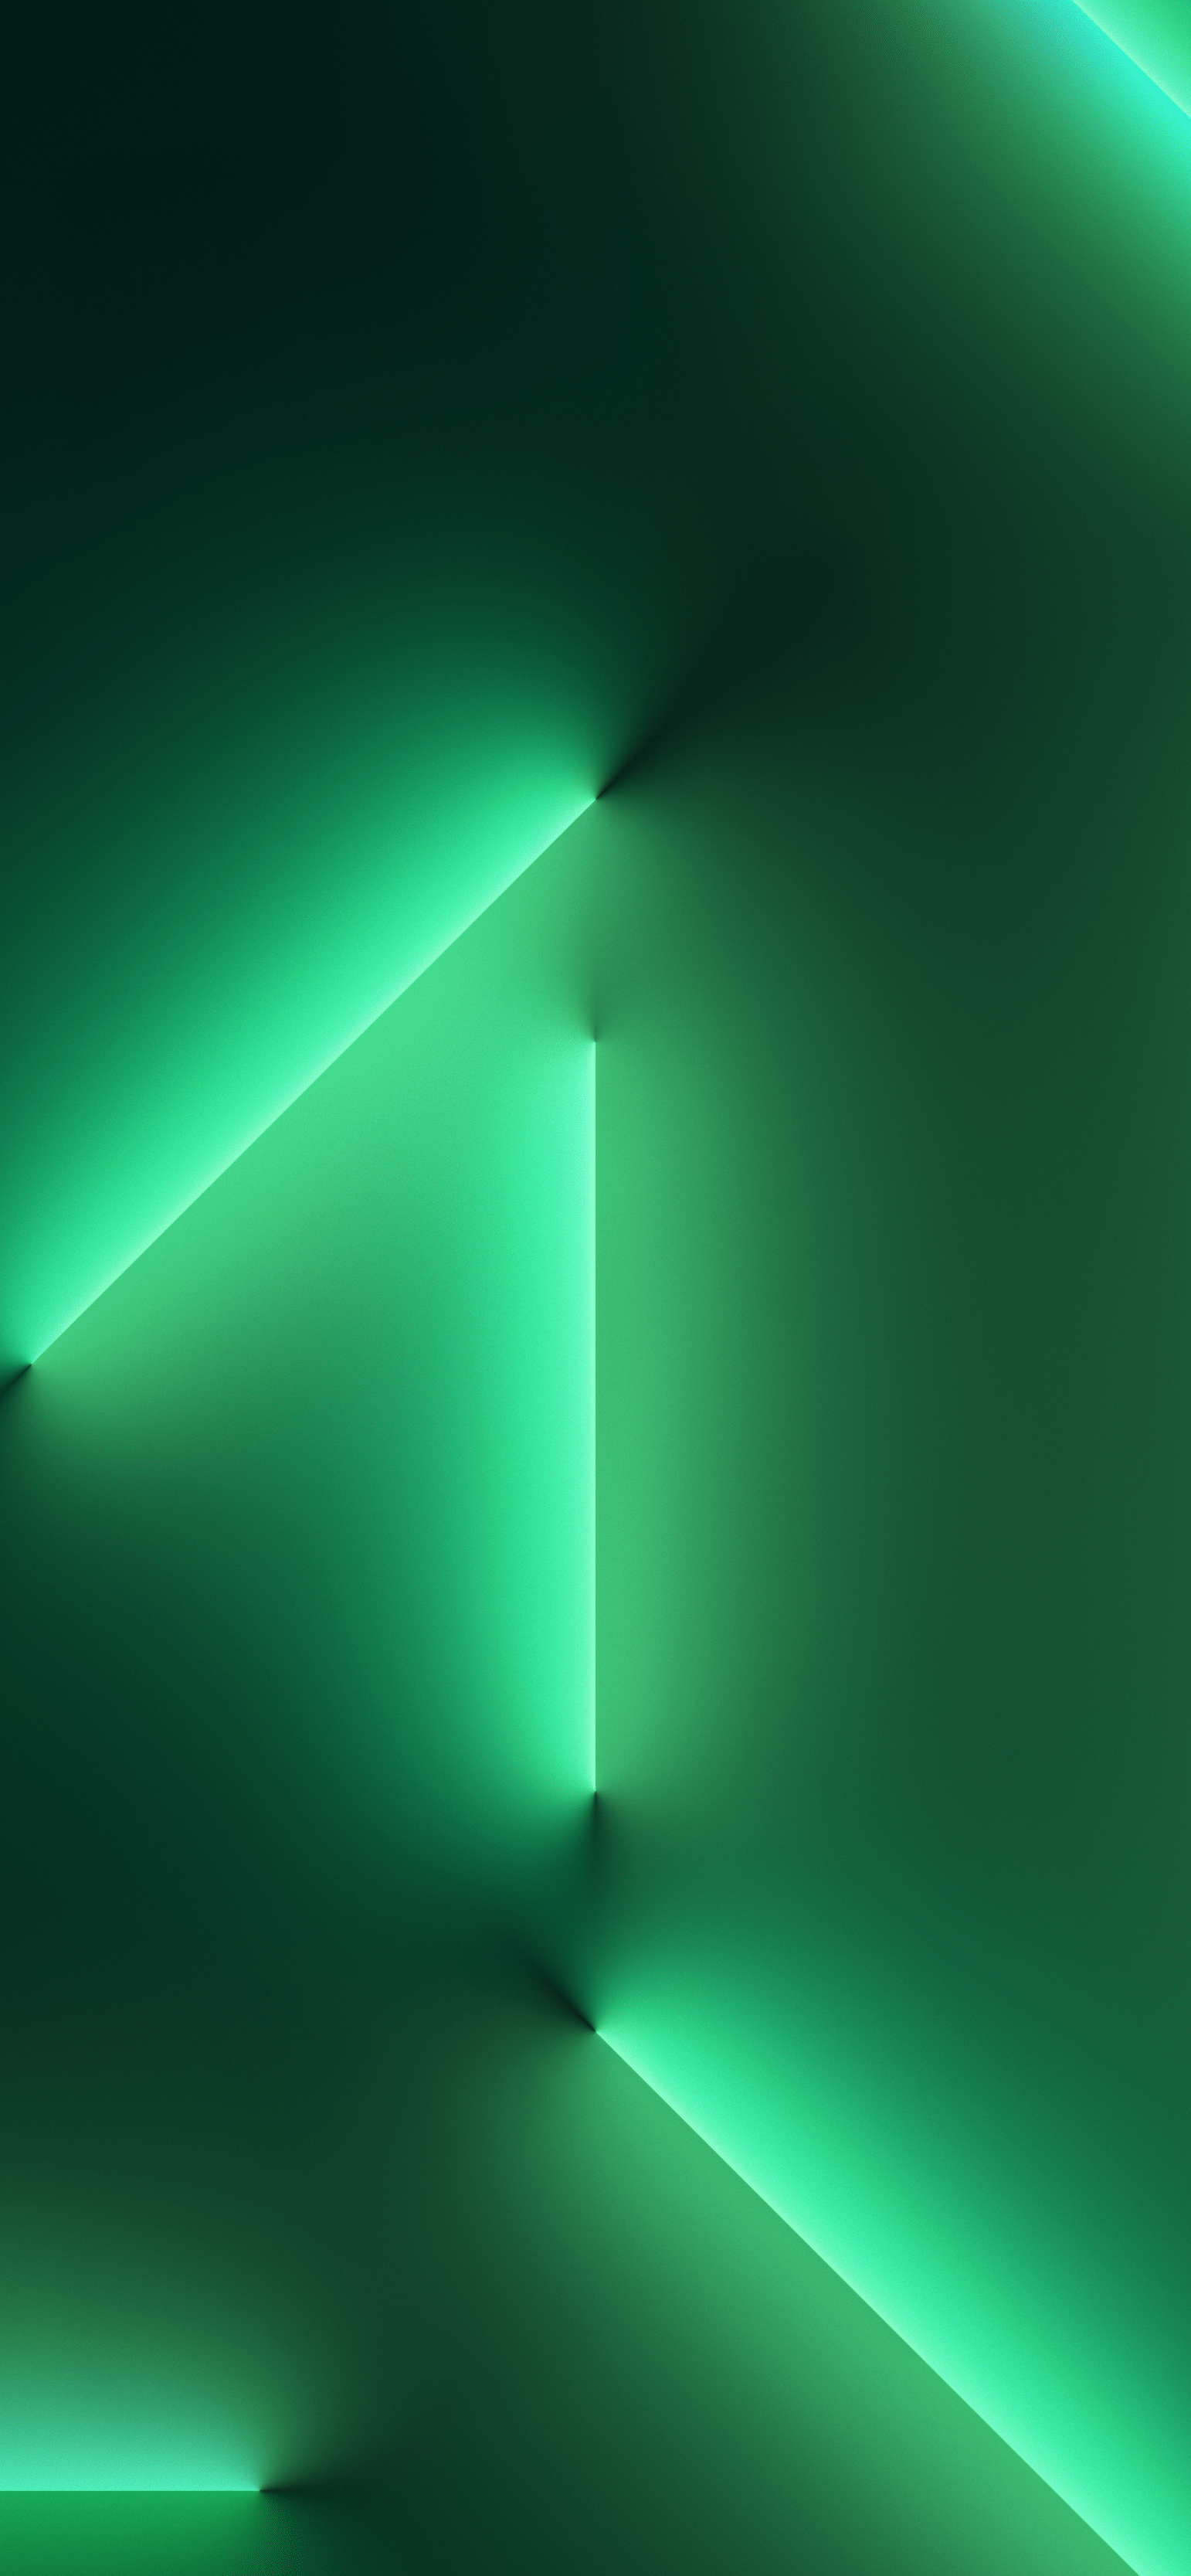 Wallpaper iPhone 12, green, abstract, Apple October 2020 Event, 4K, OS  #23088